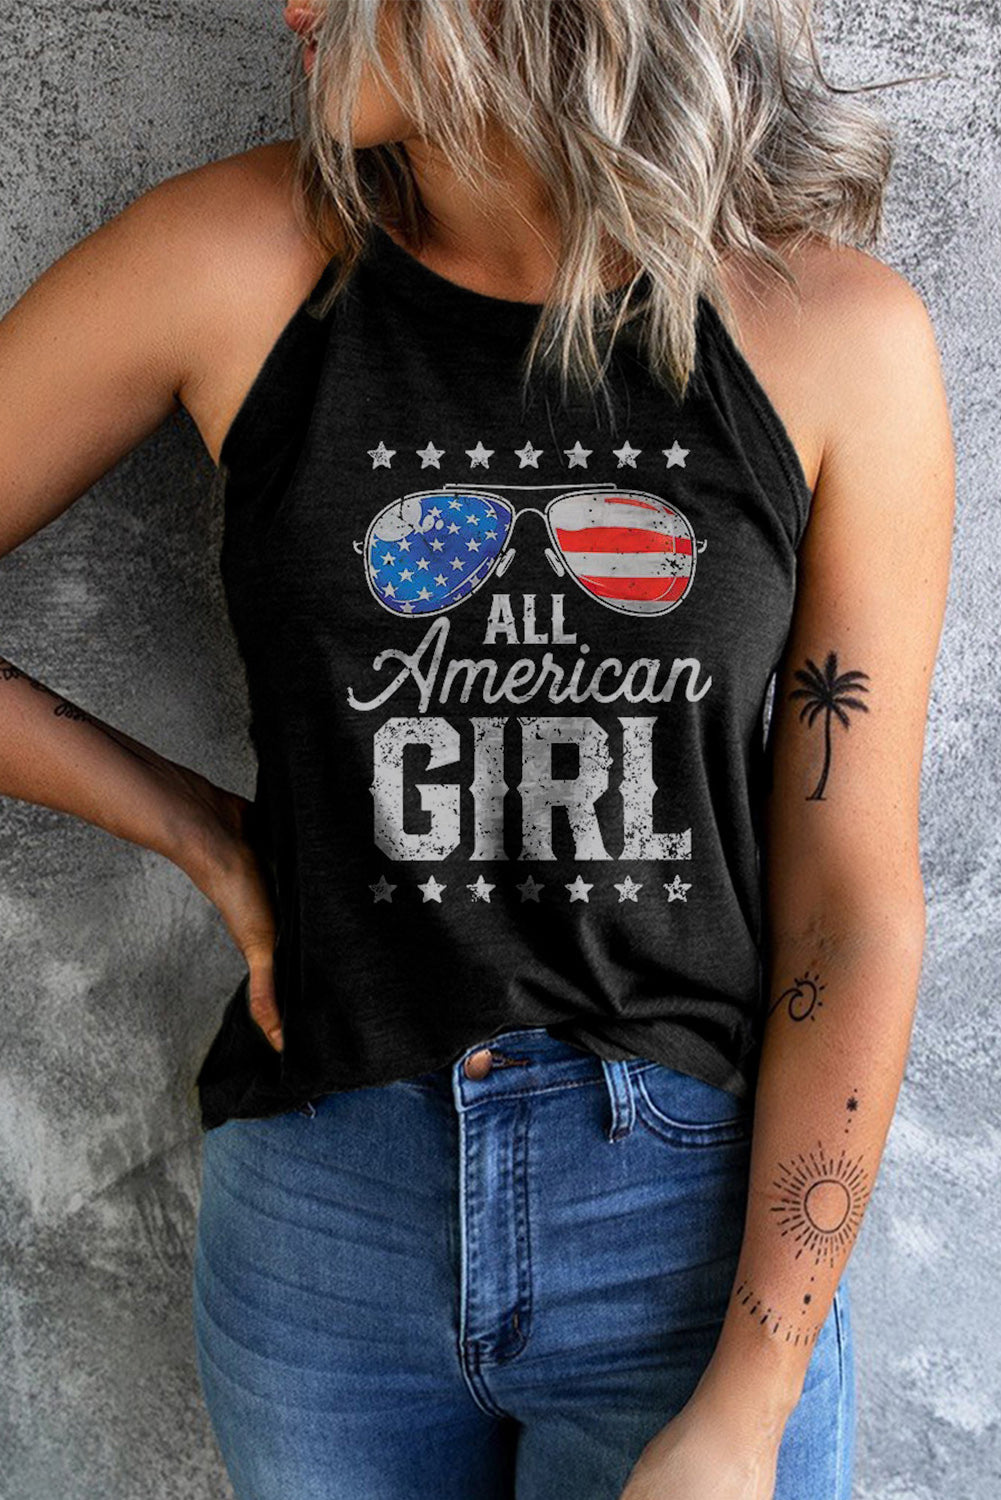 Explore the world of graphic tanks with our America Tank collection. Elevate your casual style with these trendy graphic tanks.